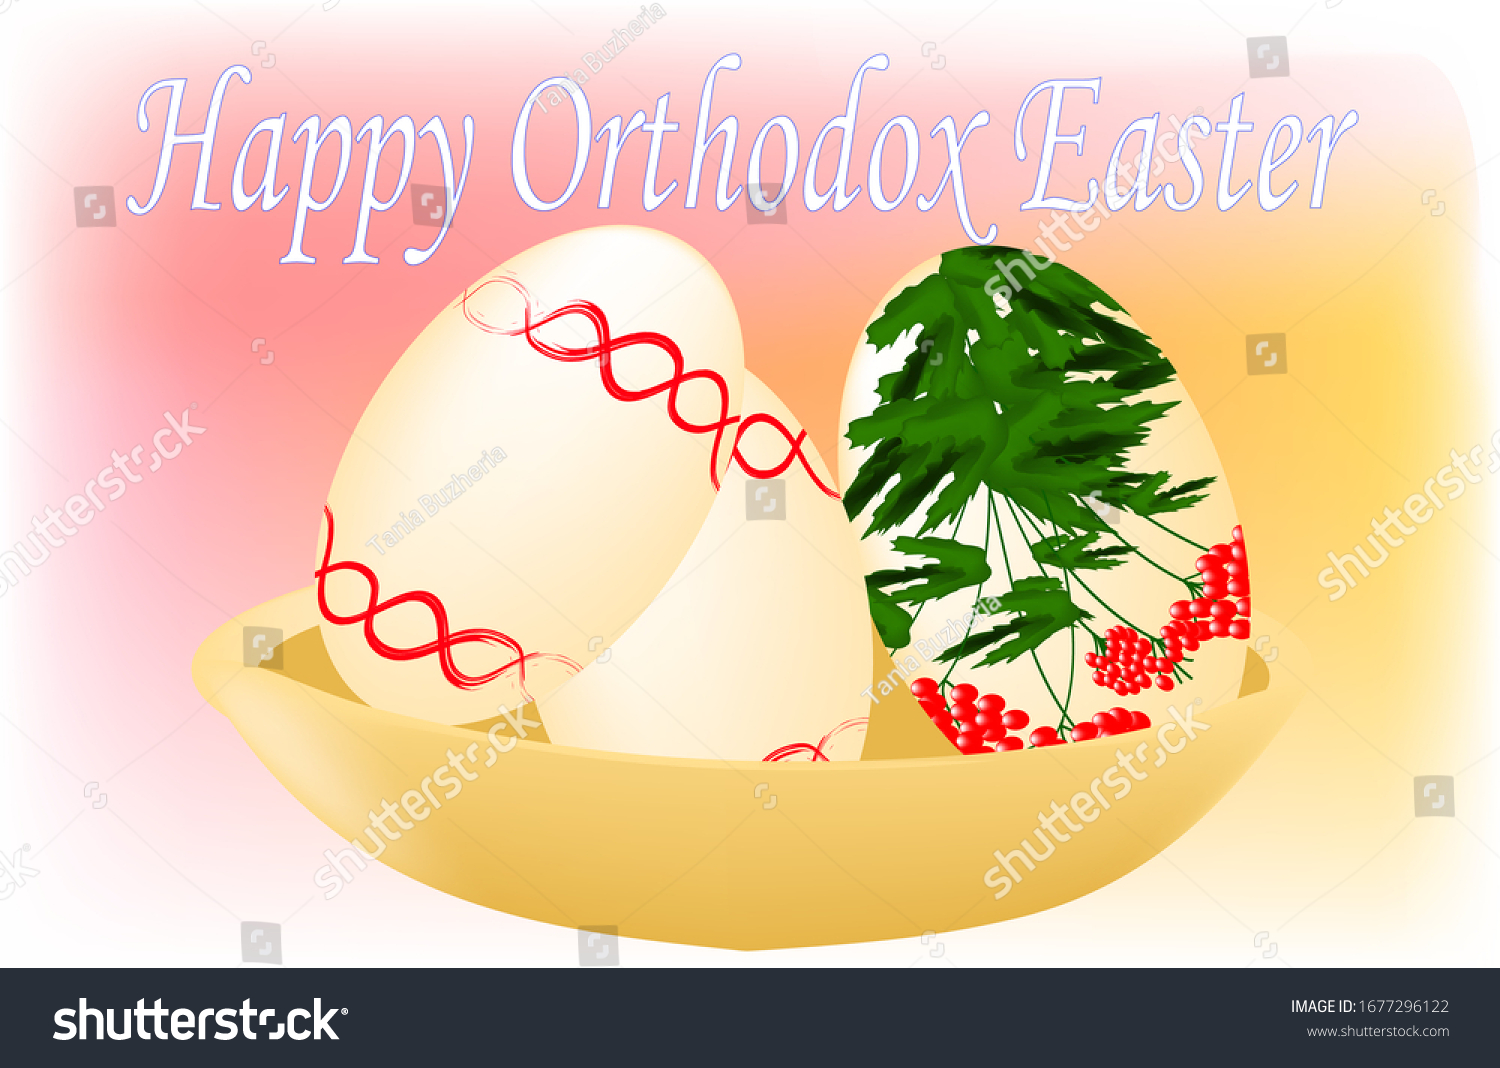 SVG of Orthodox Easter holiday card, three colored eggs in a bowl, viburnum and vishivanka, on a red-orange background svg